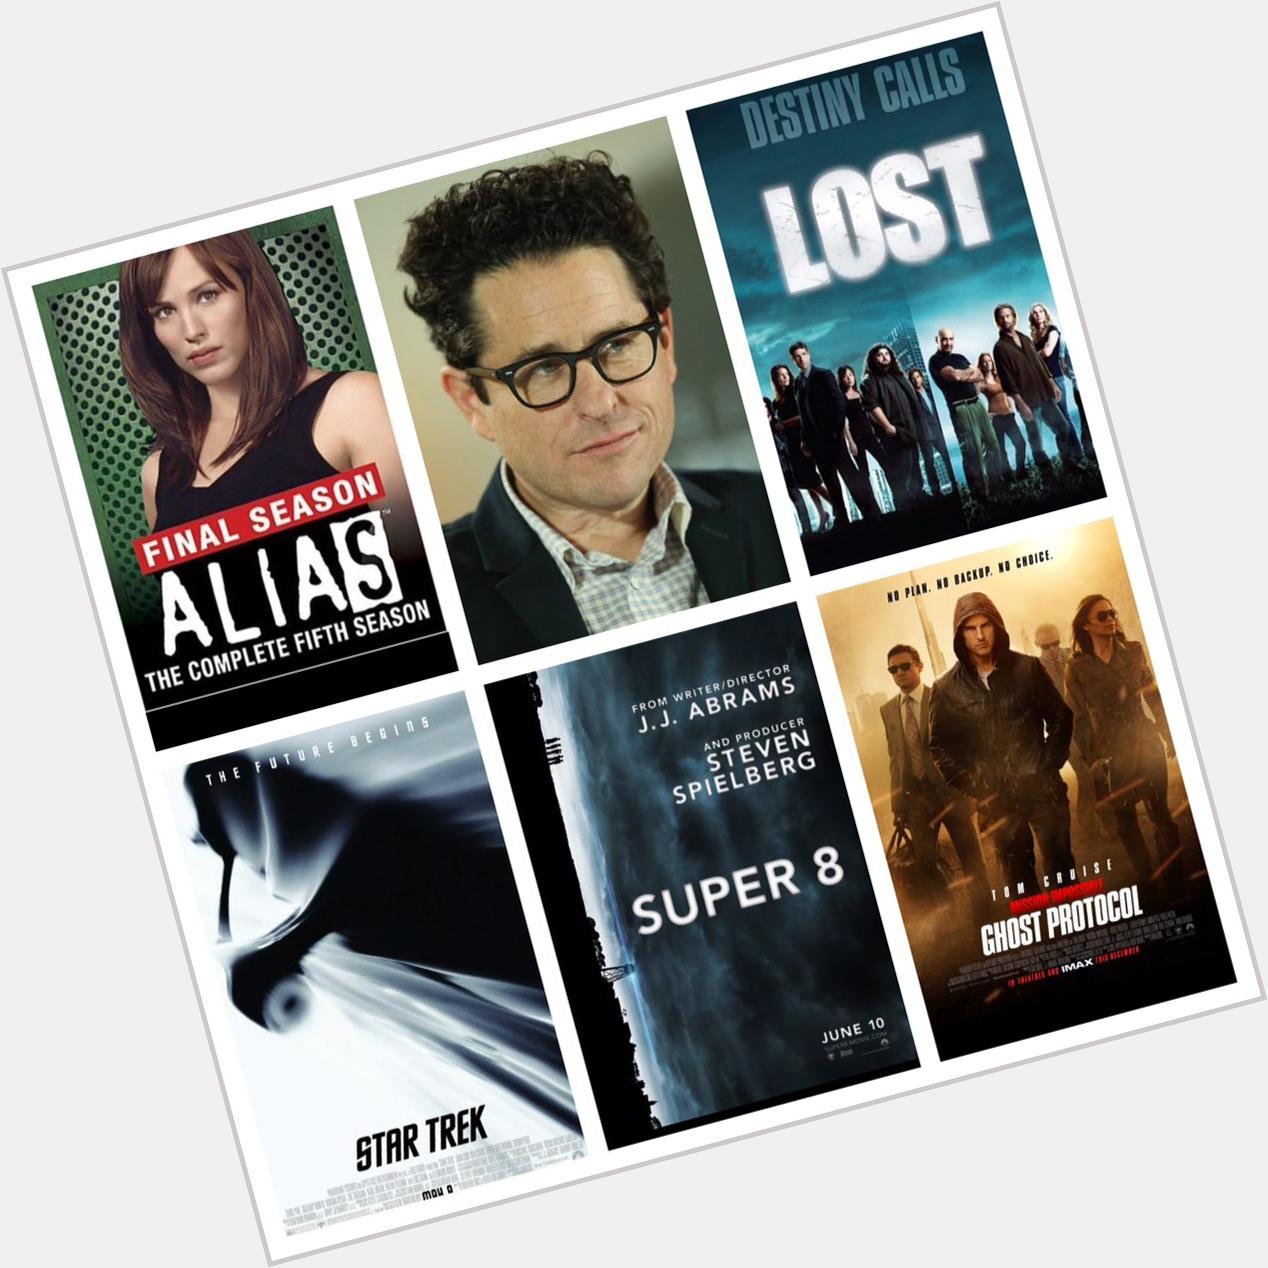 Happy Birthday JJ Abrams, thanks for the creative shows and movies! 